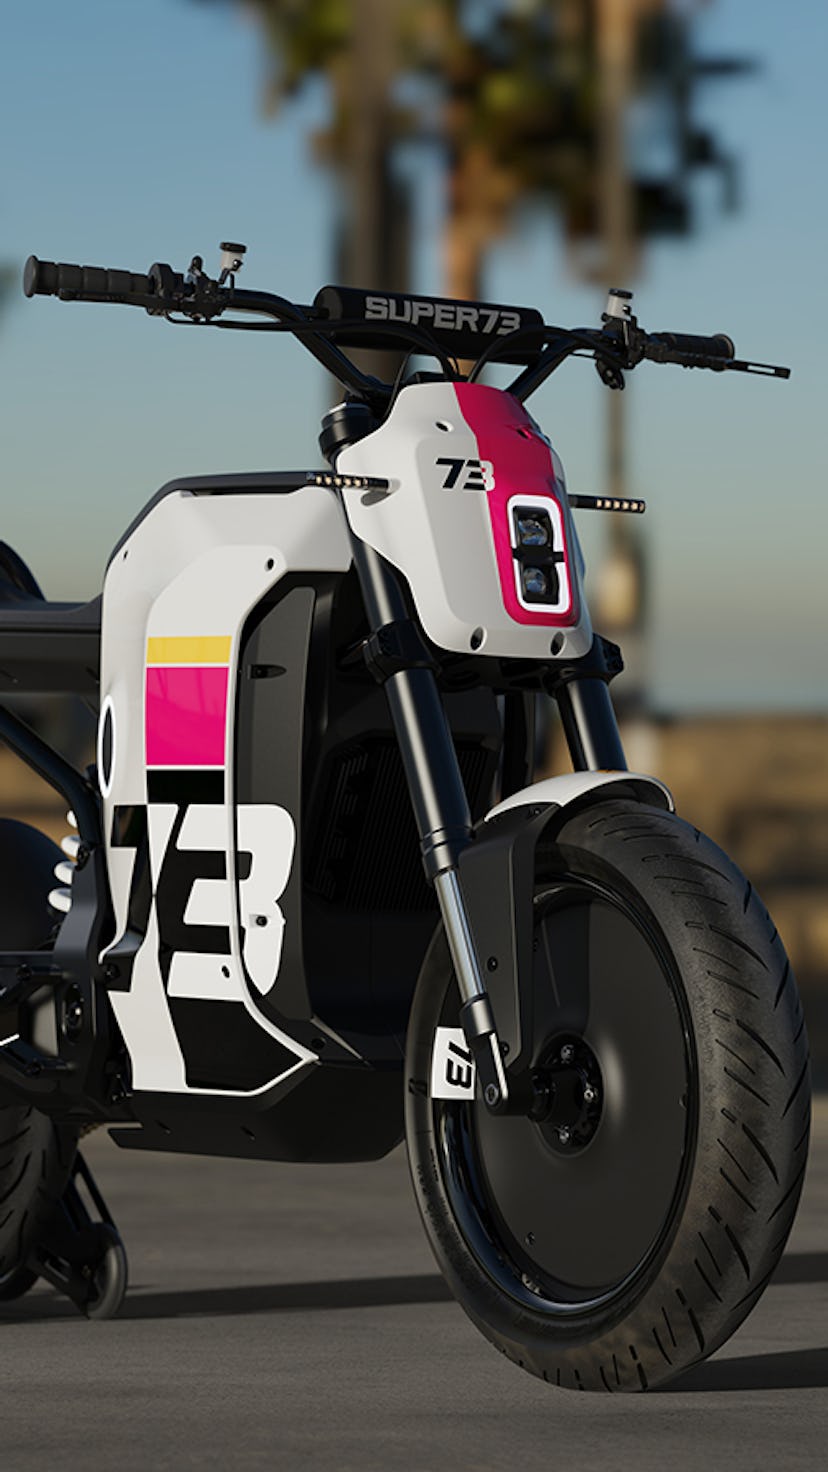 The C1X electric motorcycle/electric bike hybrid from Super73.